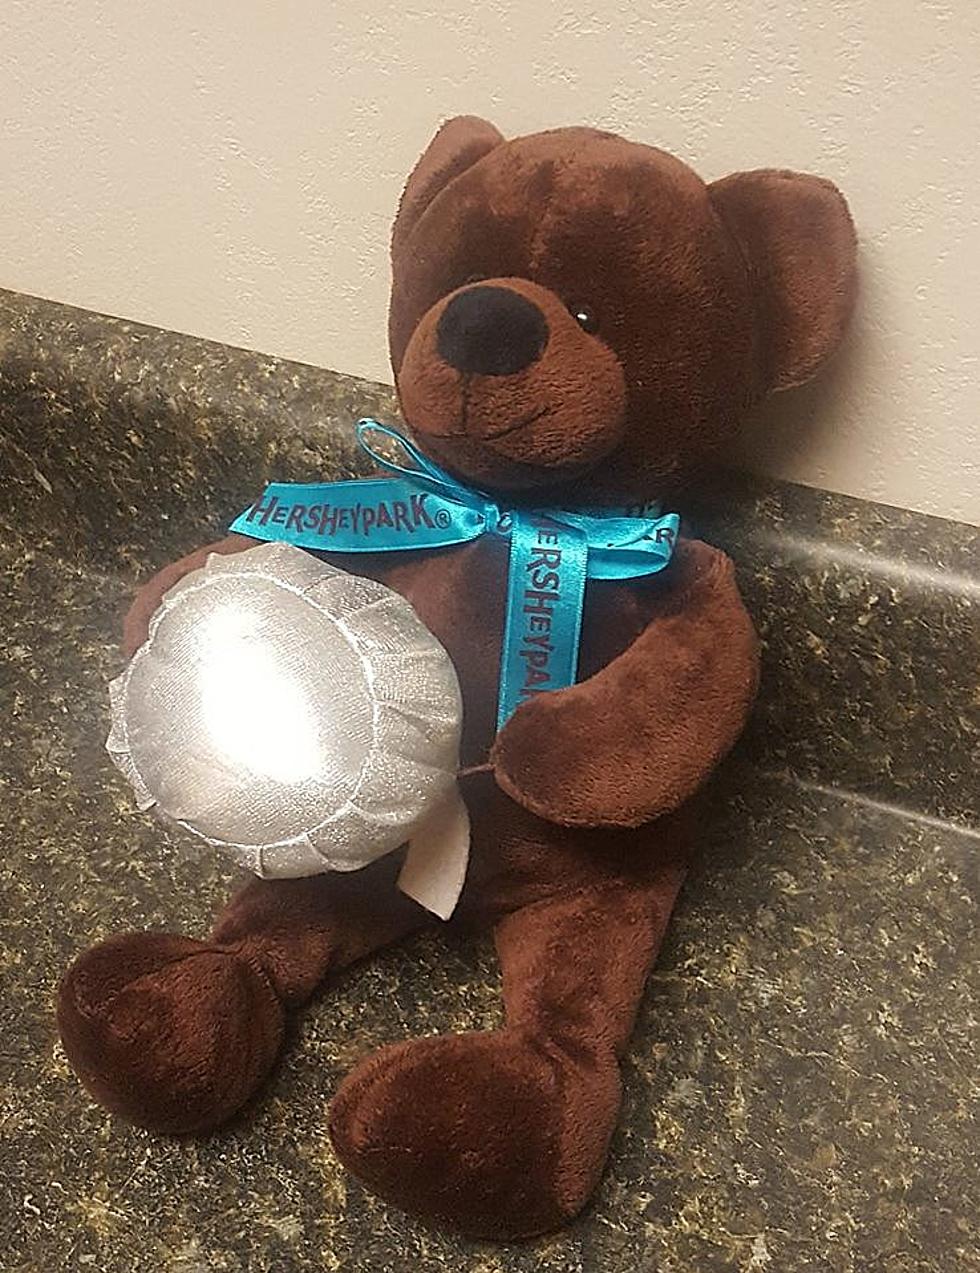 Help Us Find This Teddy Bear’s Owner